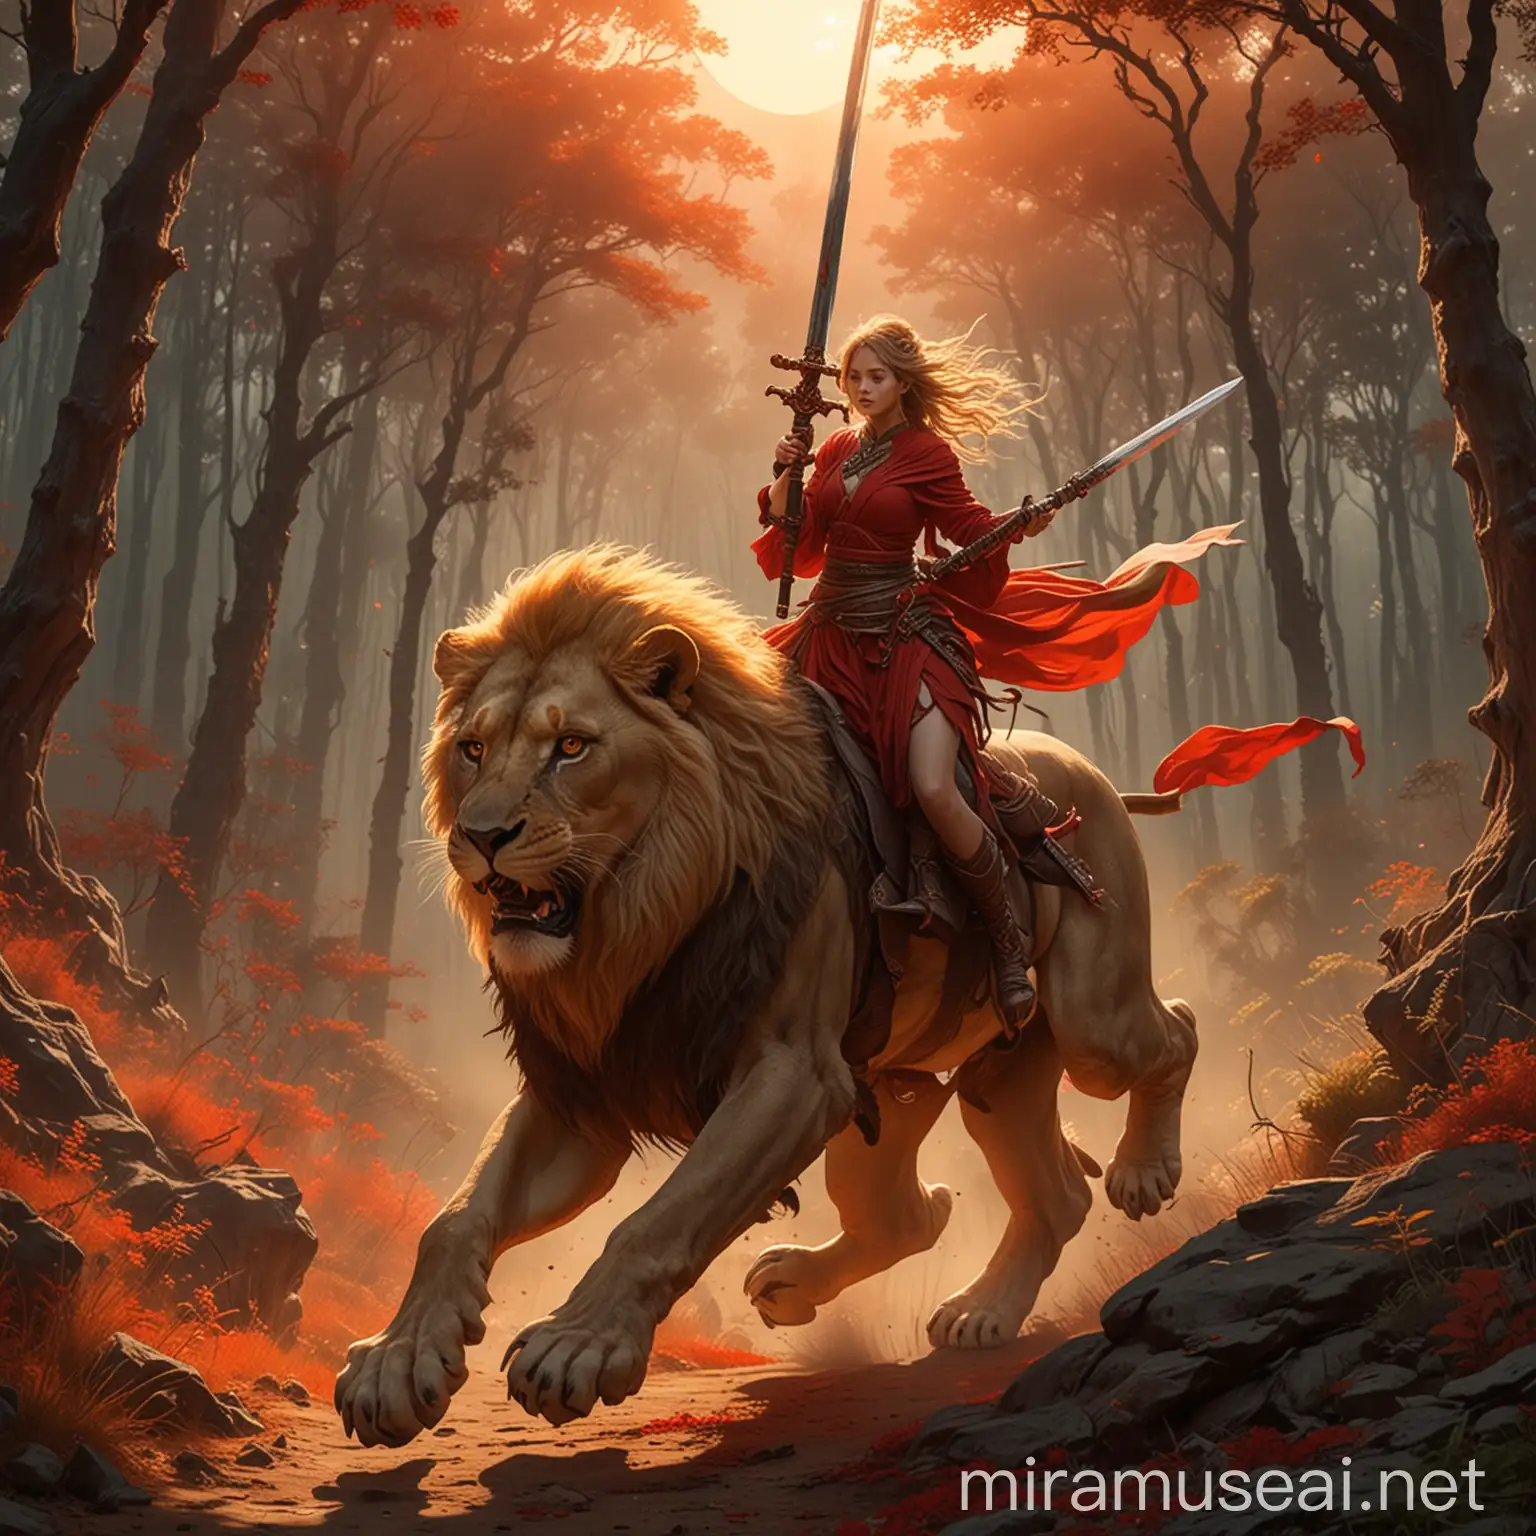 cute women ride on a lion sword in hand run inside of a forest & mountain  red sun is rising 